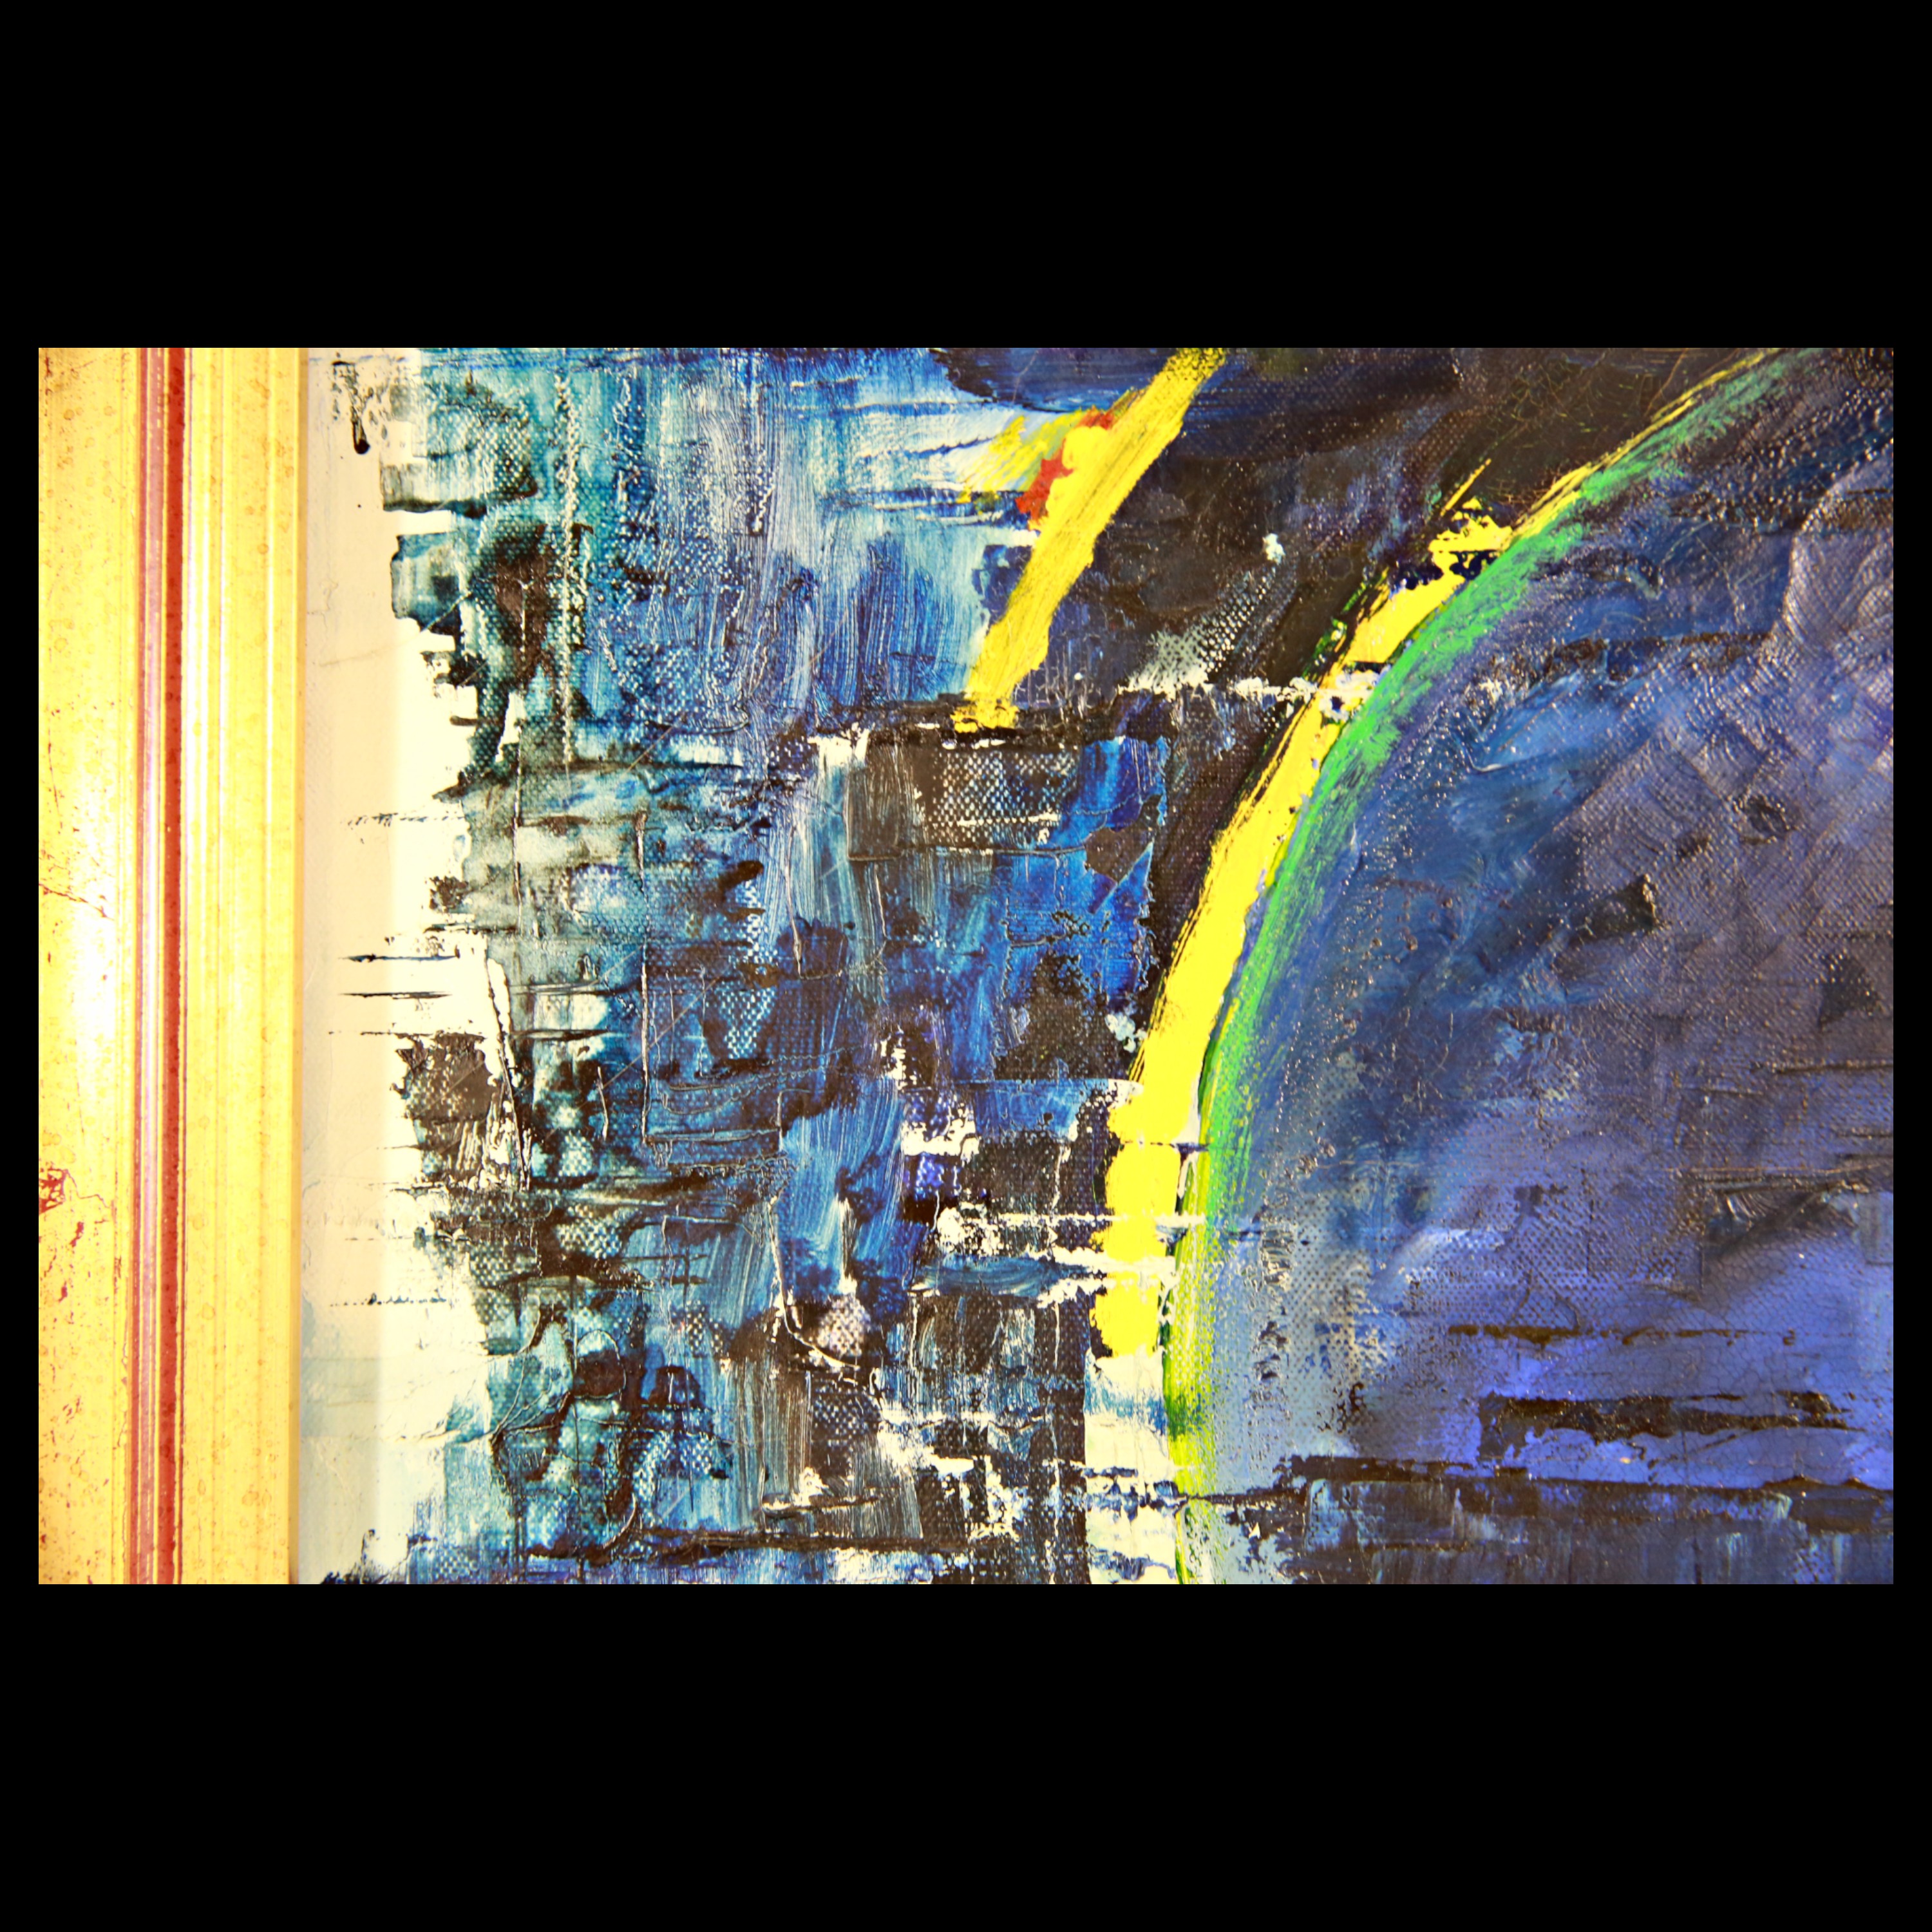 Jean Claude MENASCE, abstract painting, oil on canvas, 1969, French painting of the 20th century. - Image 3 of 8